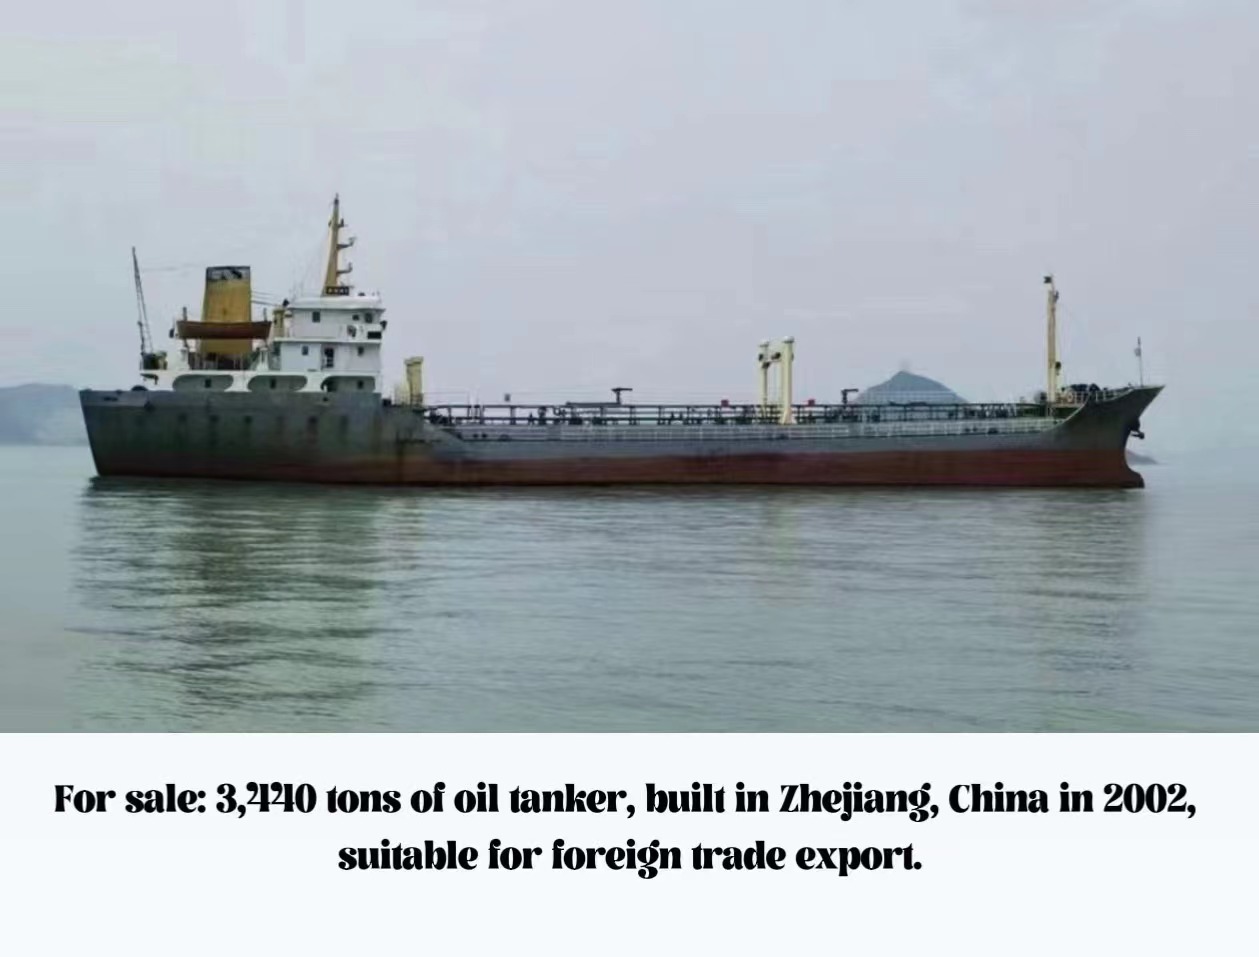 For sale: 3,440 tons of oil tanker, built in Zhejiang, China in 2002, suitable for foreign trade export.